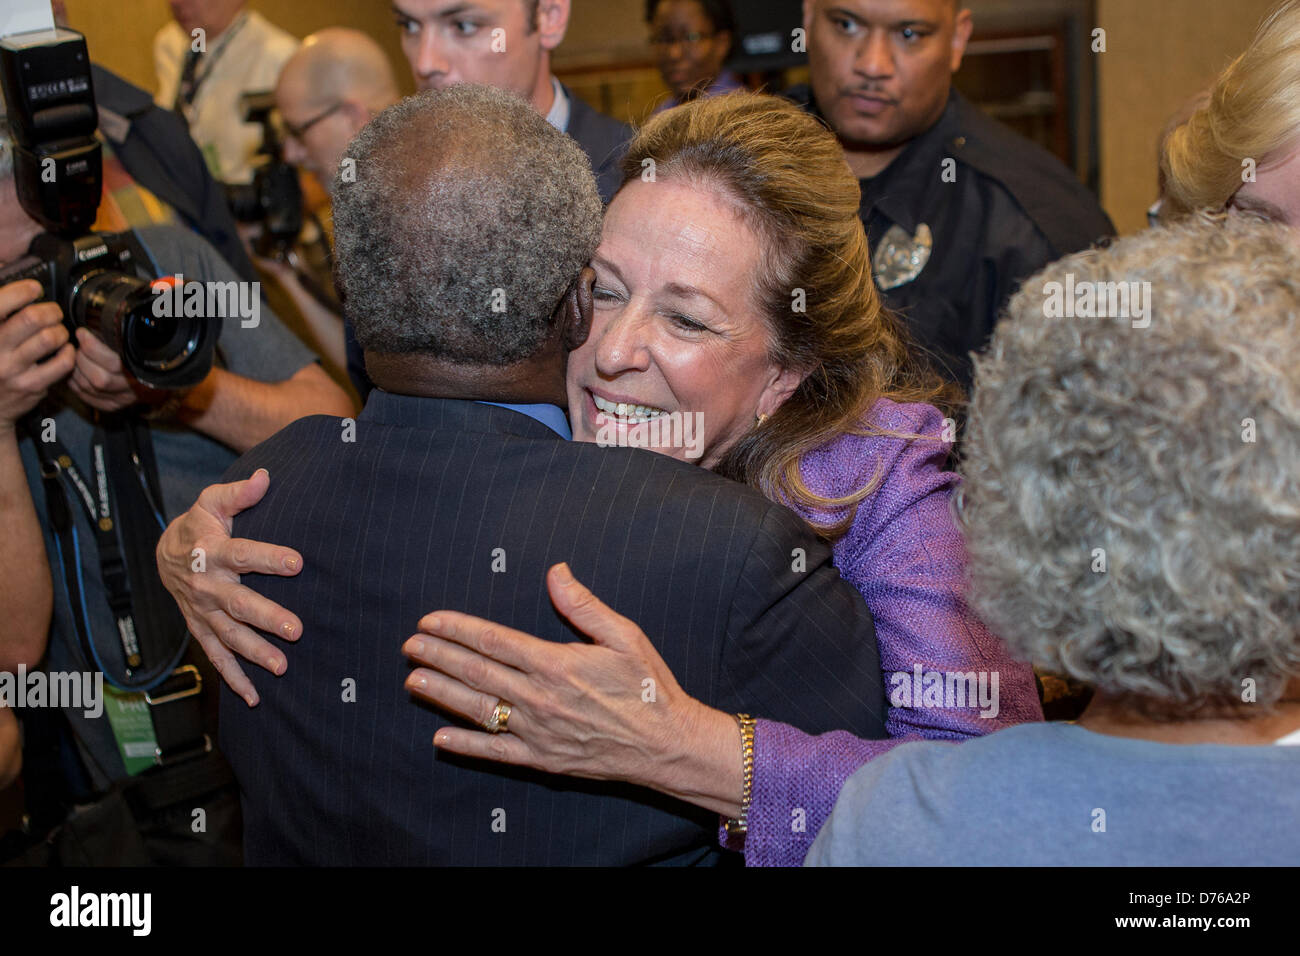 Elizabeth Colbert Busch the democratic candidate for the open Congressional seat is hugged by a supporter following her debate with republican opponent Gov. Mark Sanford at the Citadel on April 29, 2013 in Charleston, South Carolina. Stock Photo